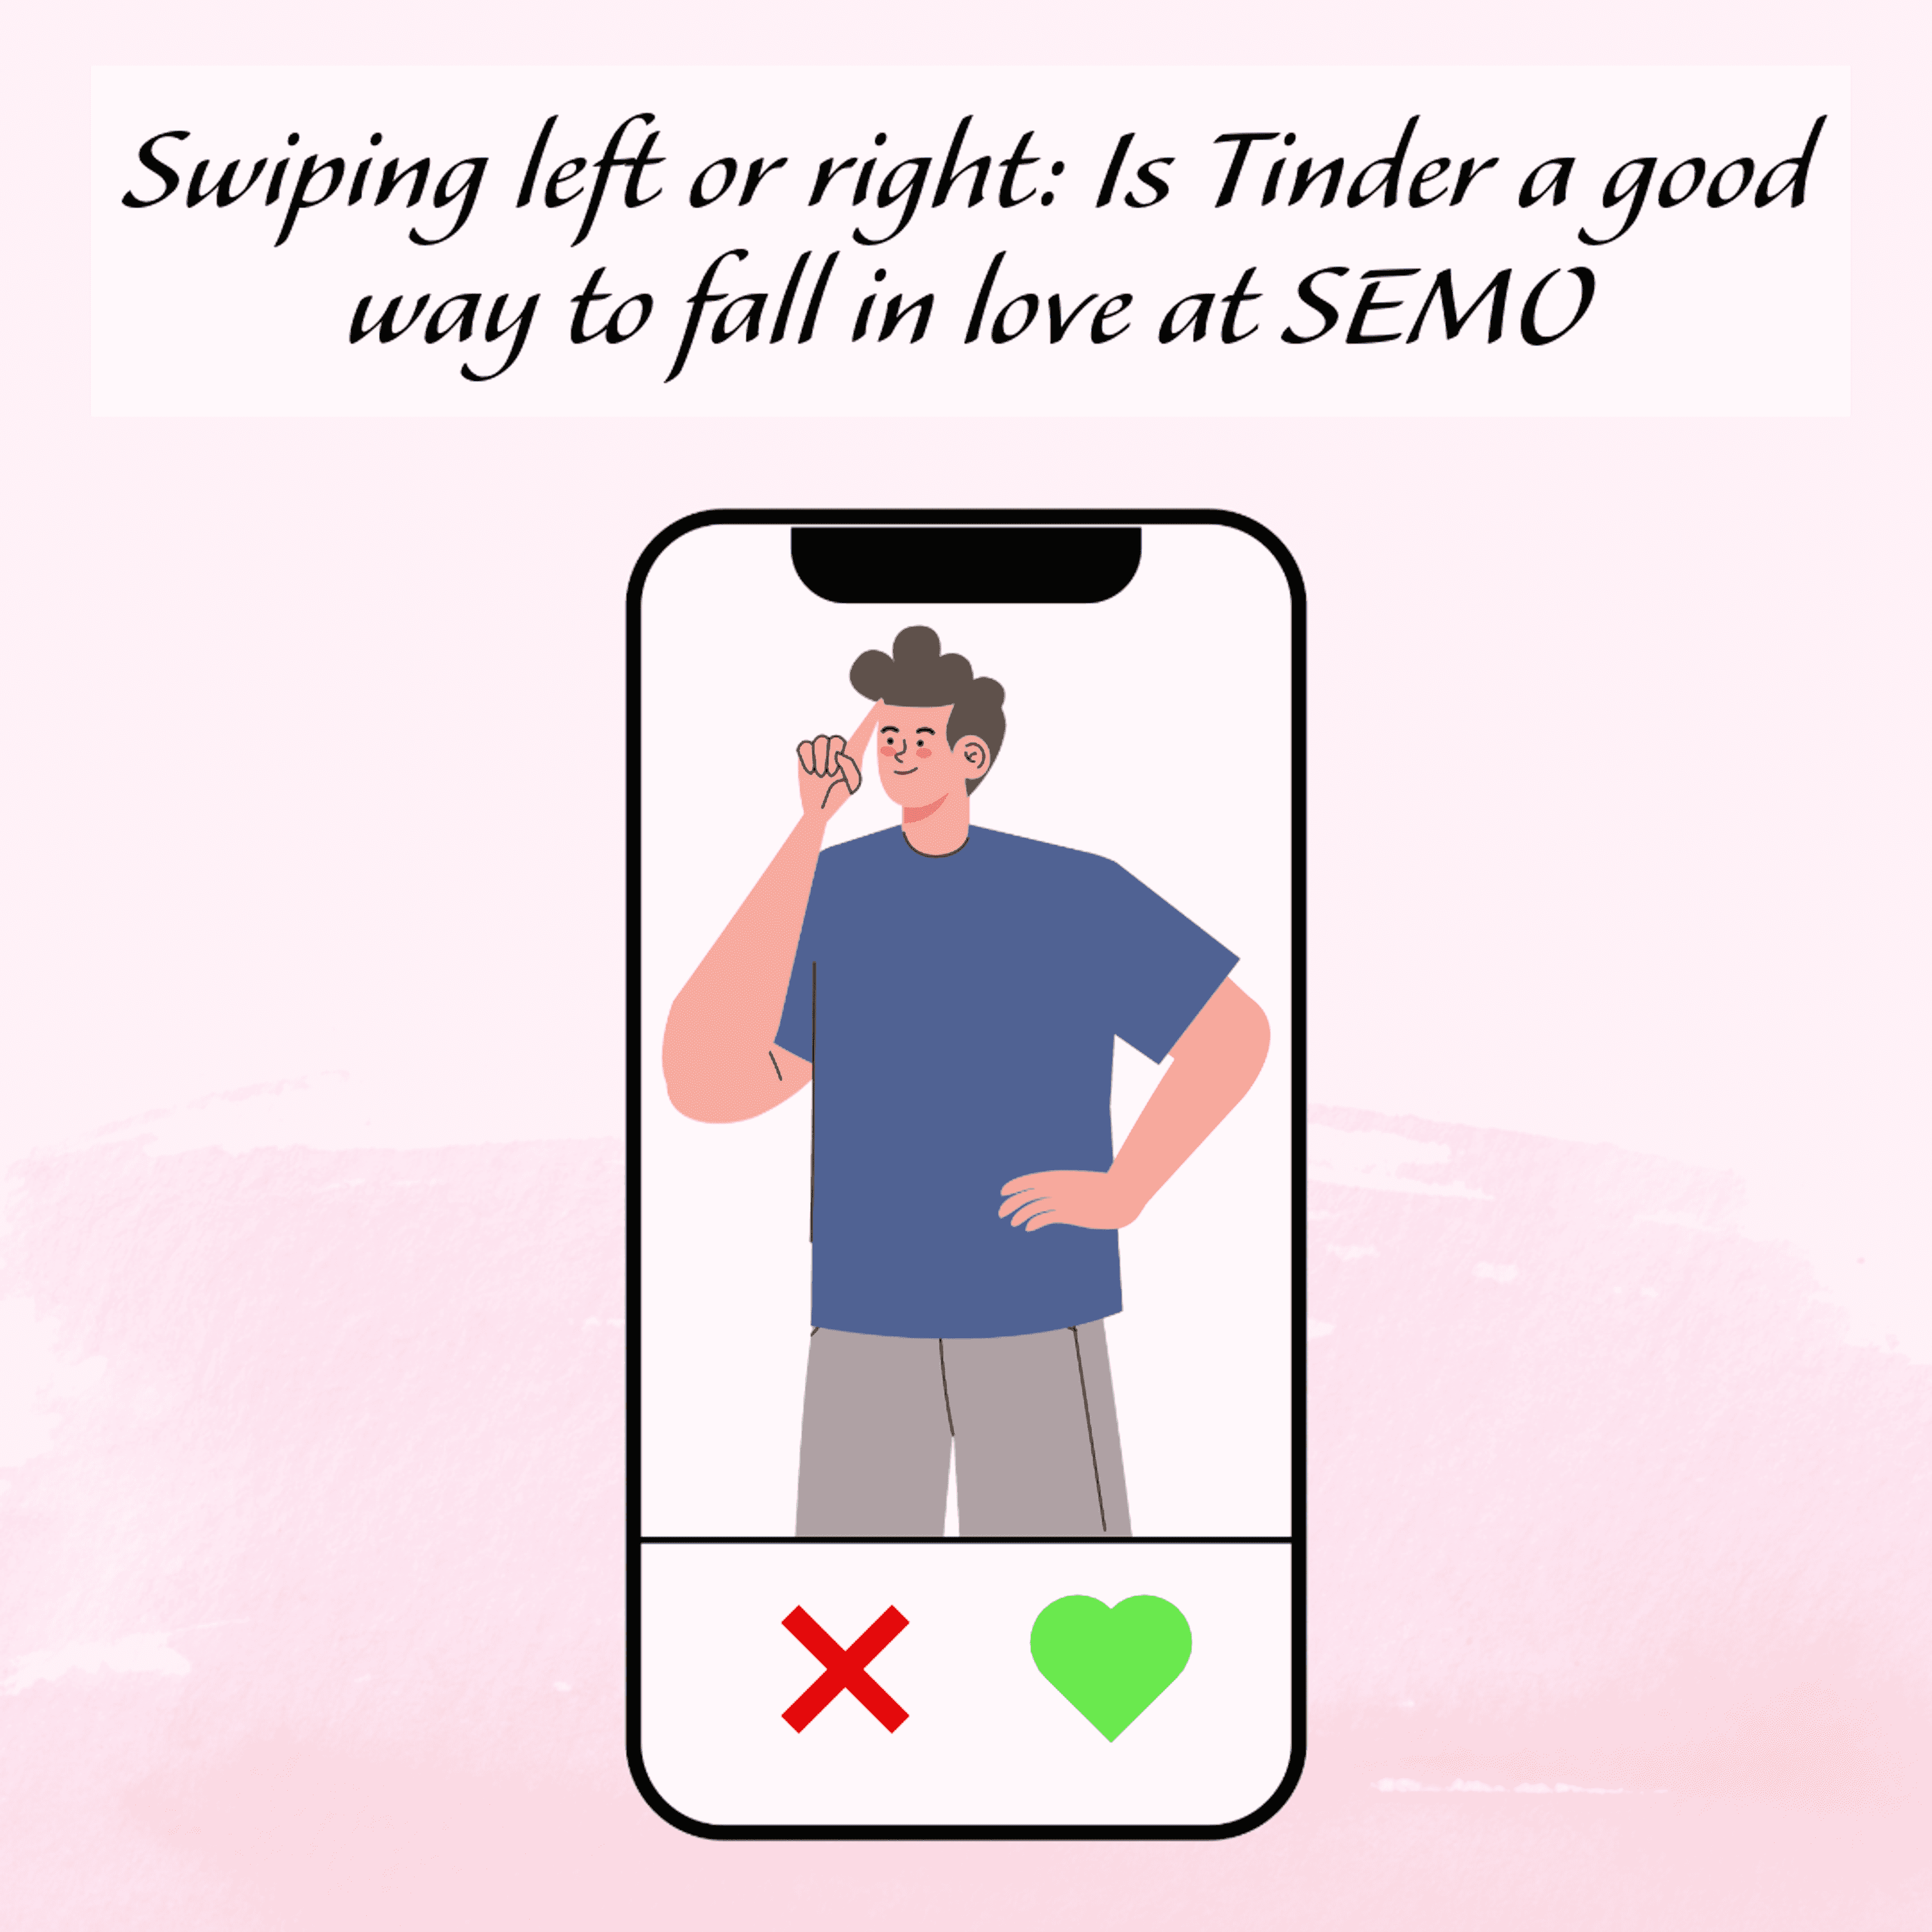 Swiping left or right: Is Tinder a good way to fall in love at SEMO